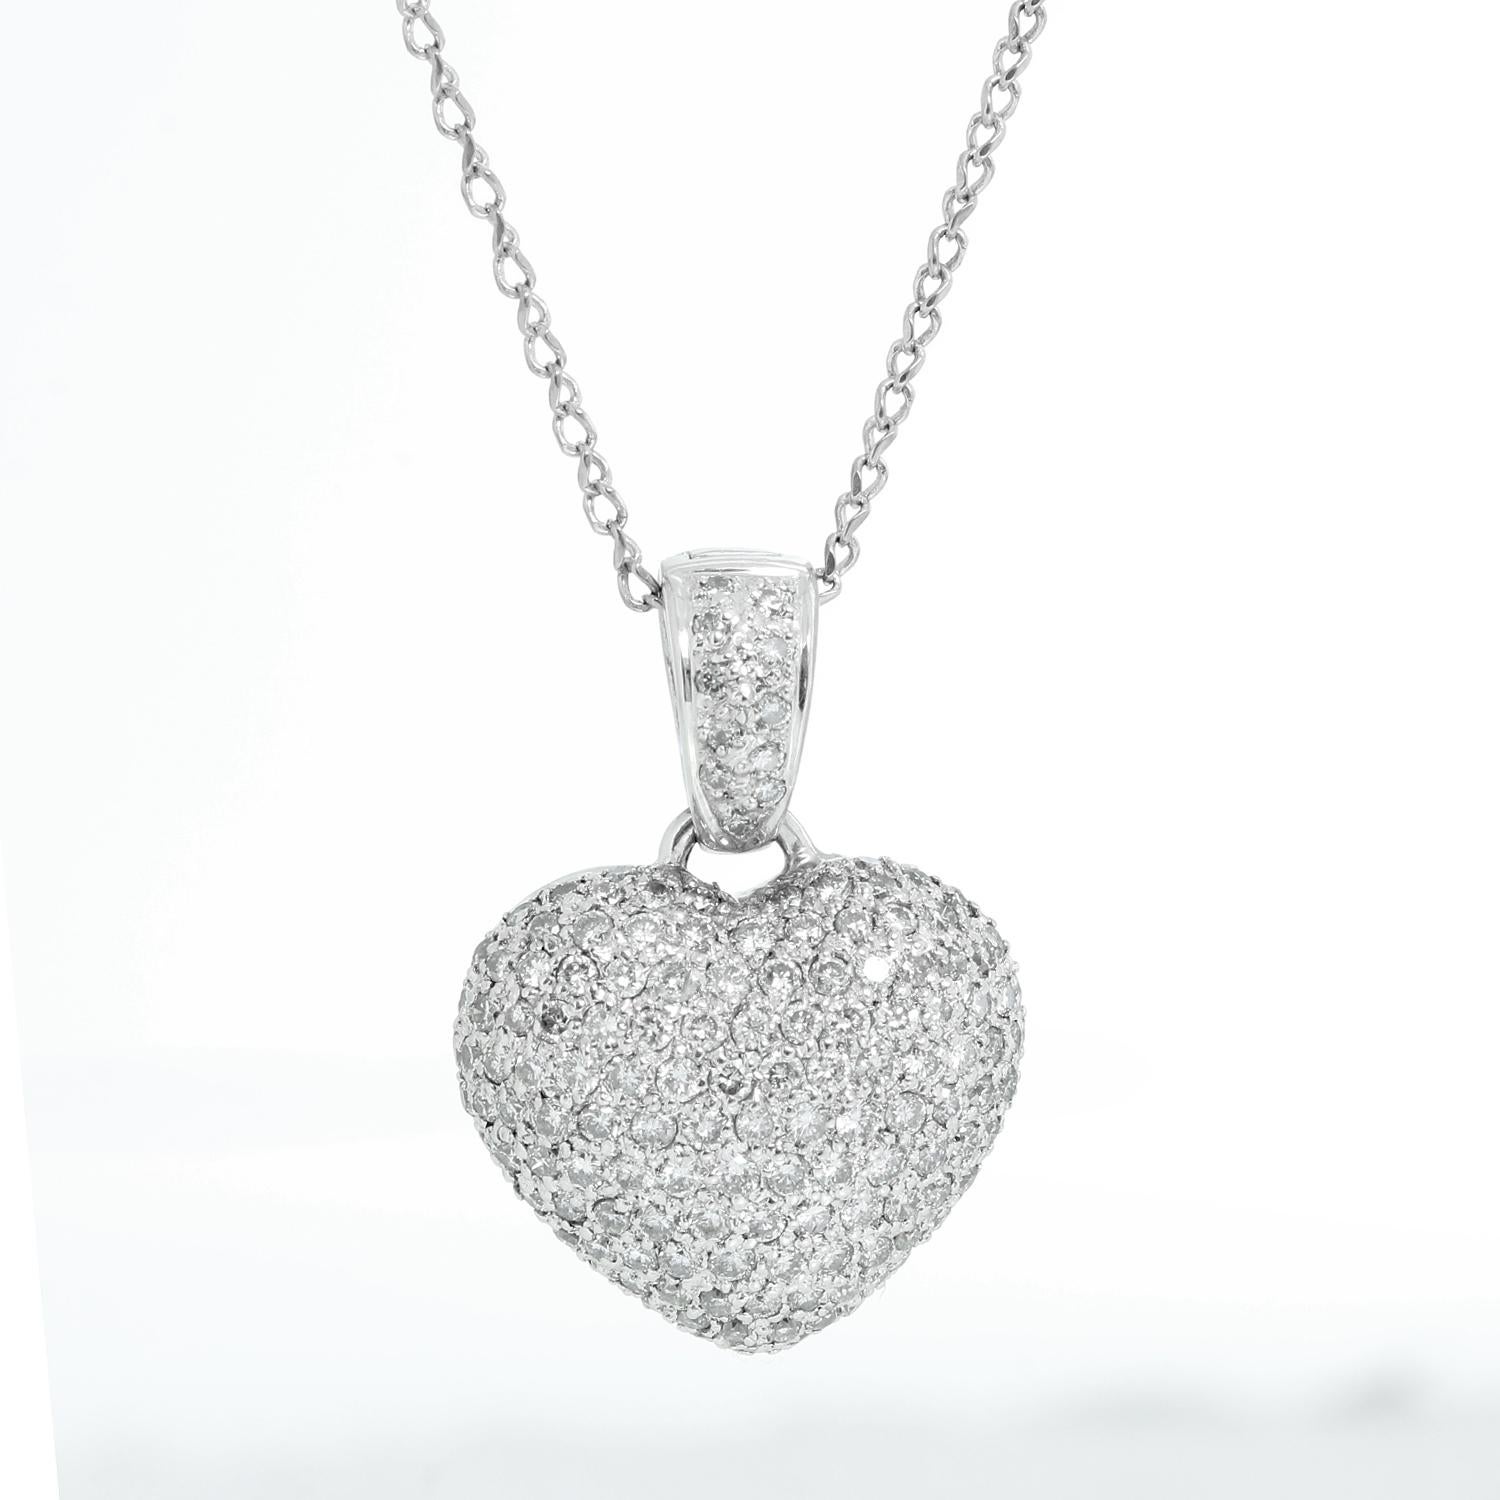 18K White Gold Pave Diamond Necklace - Beautiful Pave white gold diamond heart measuring 1 inch. on a 20 inch white gold chain. Approx. 1 cts of diamonds. Pre-owned with custom necklace box. 